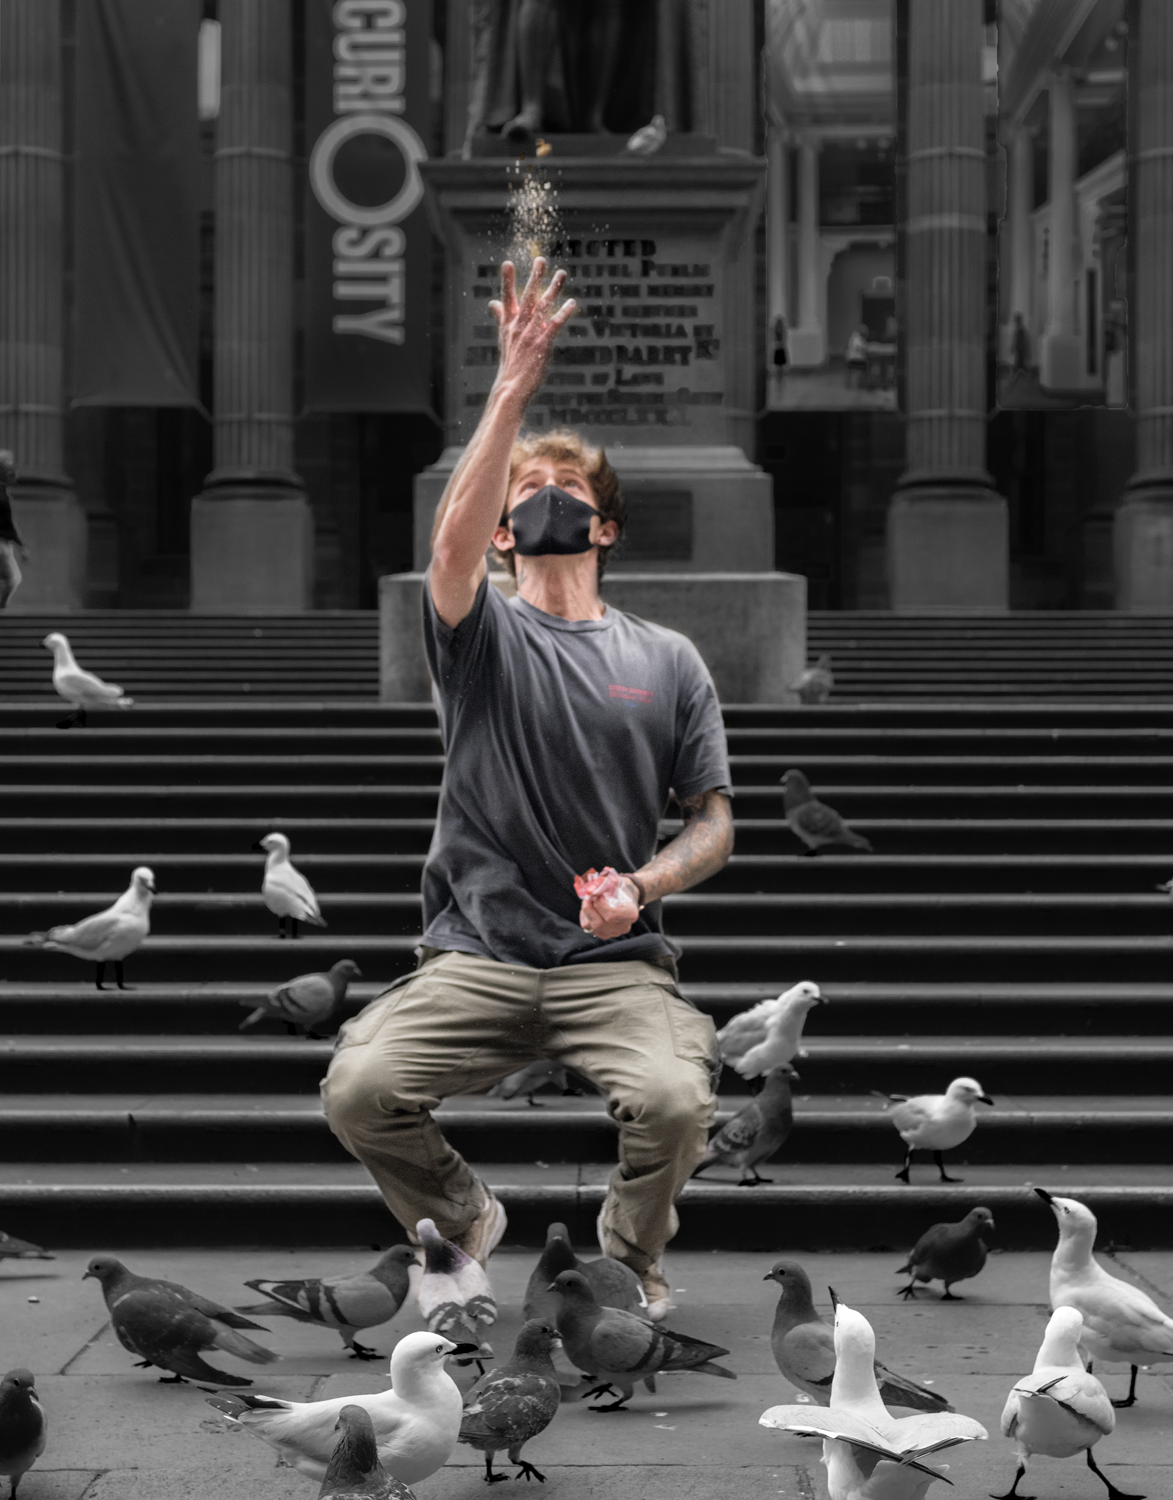 Colour photograph with digital rendering depicting a man throwing breadcrumbs in the air amongst a crowd of pigeons in a city environment.